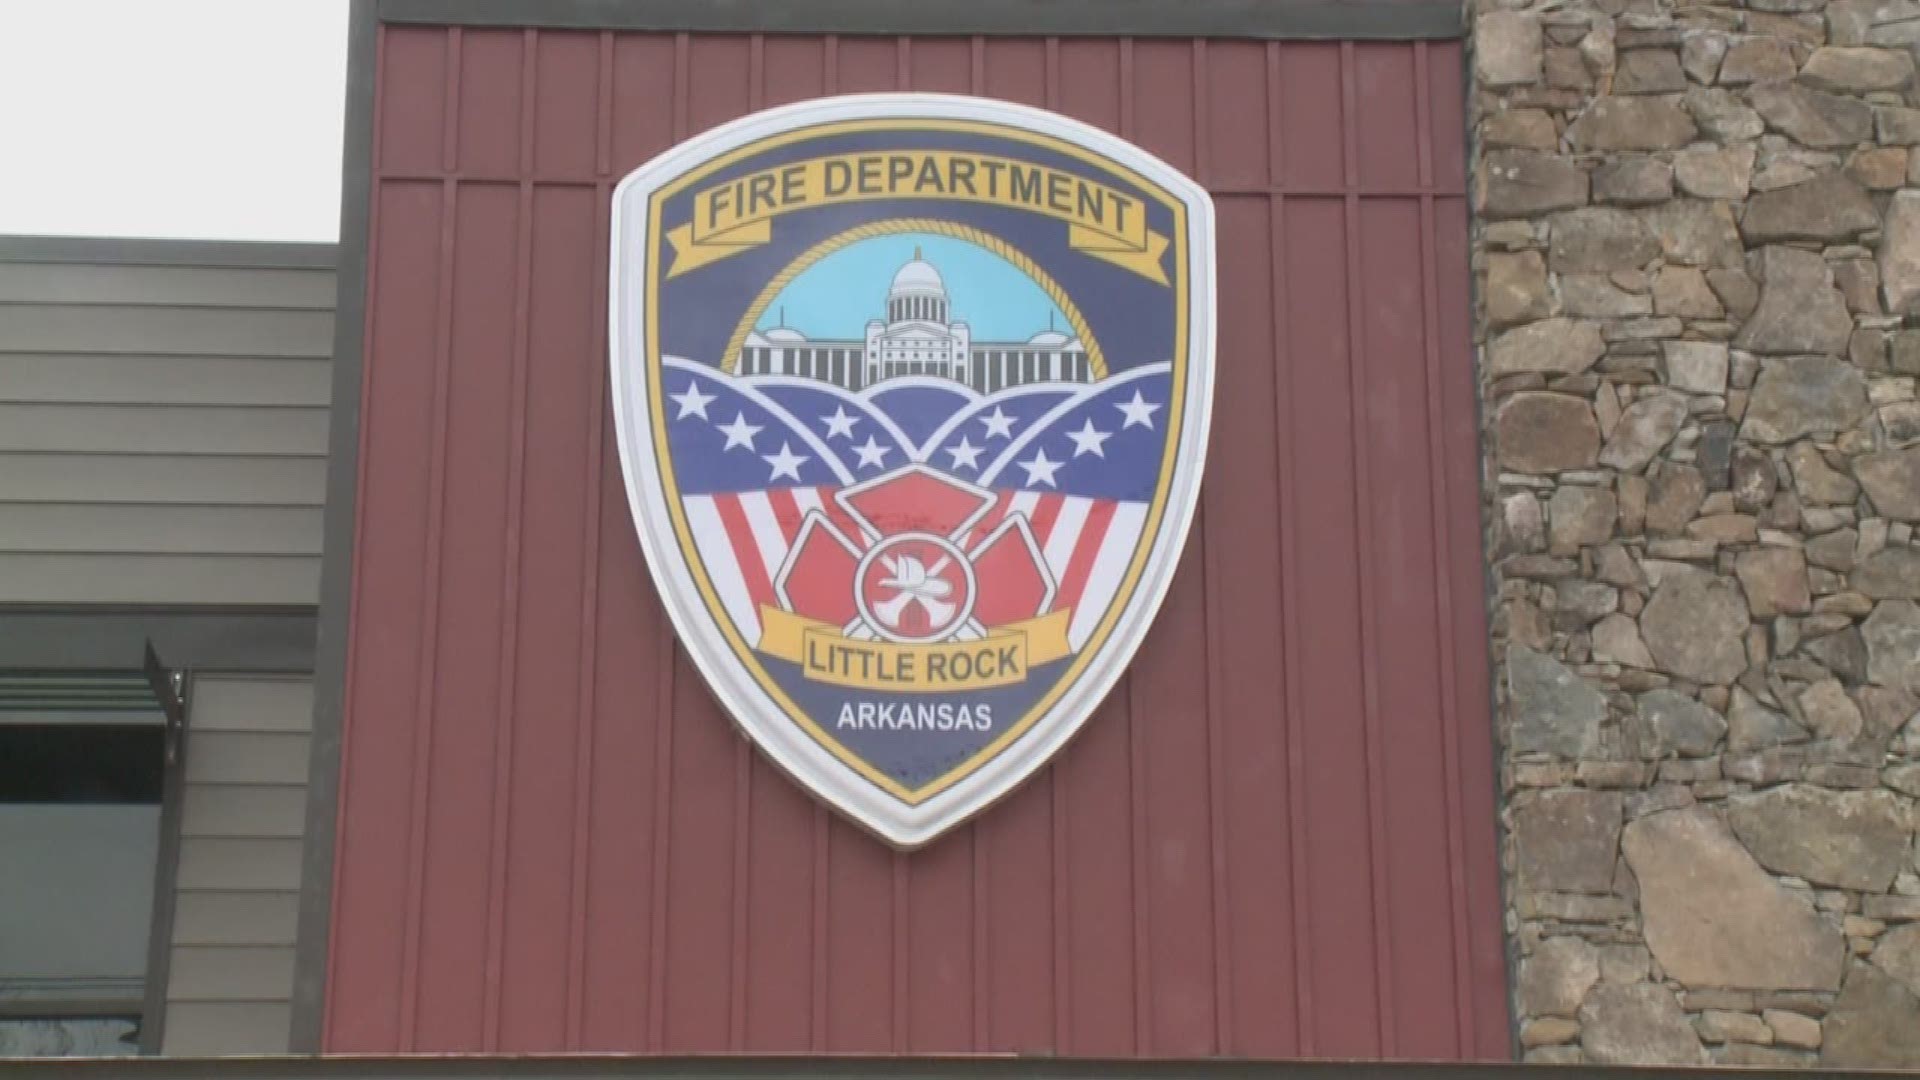 Little Rock's new 'Southwest Fire Station 24' is open and ready to protect and serve.